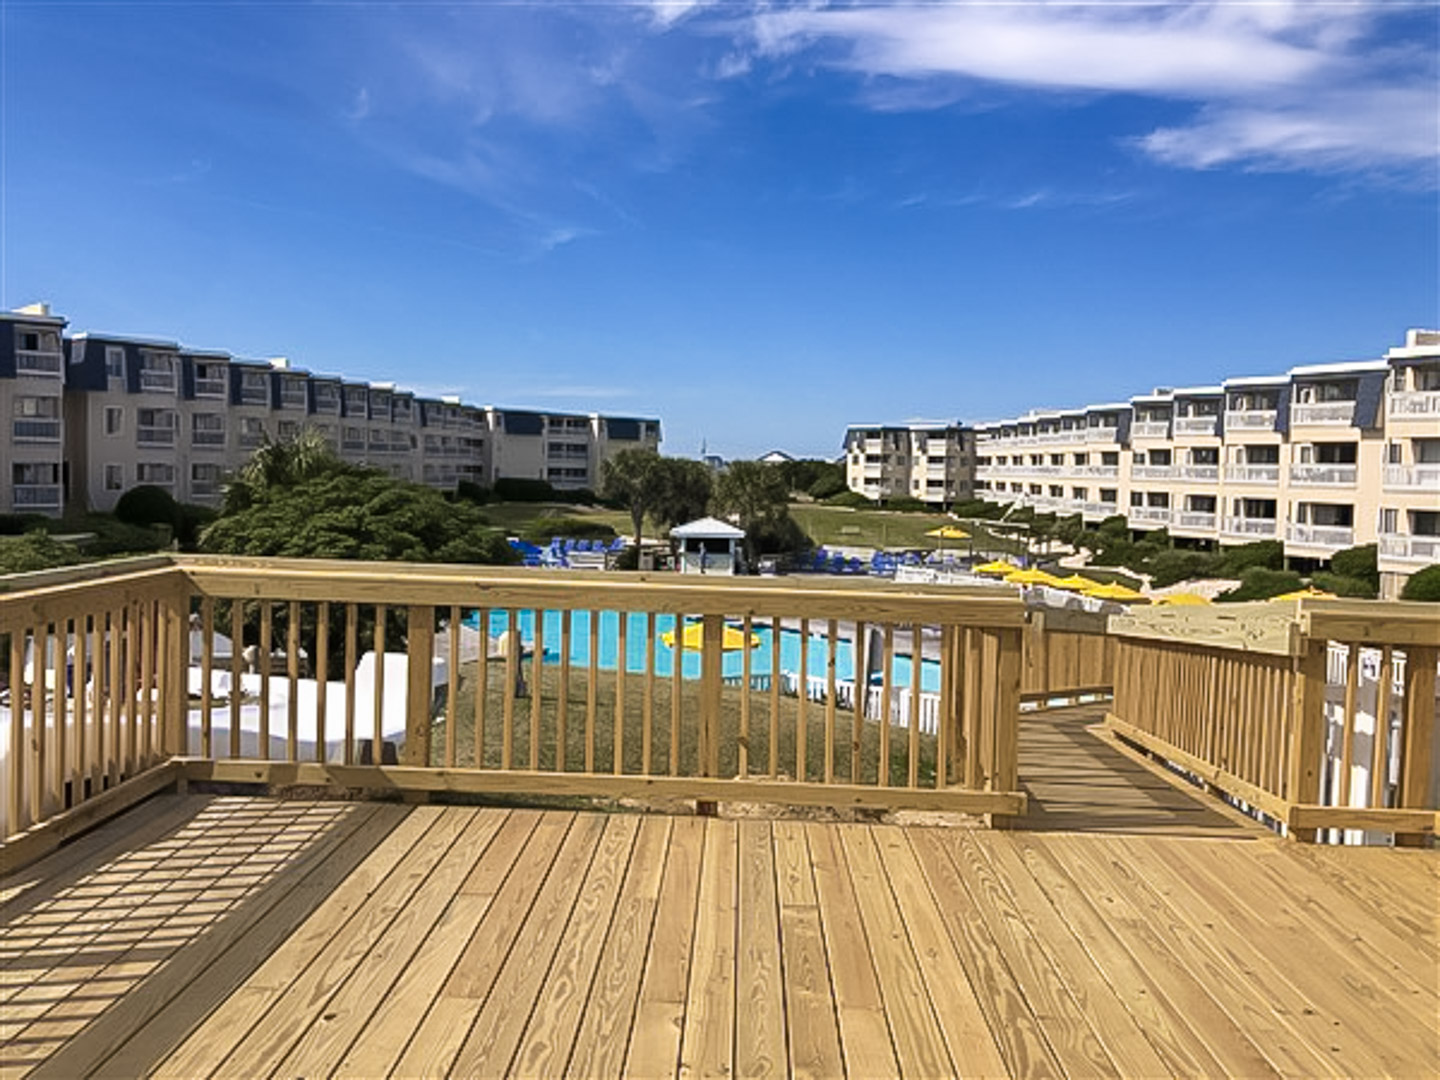 An overlook view of the pool and exterior of the building at VRI's A Place at the Beach in Atlantic Beach, NC.